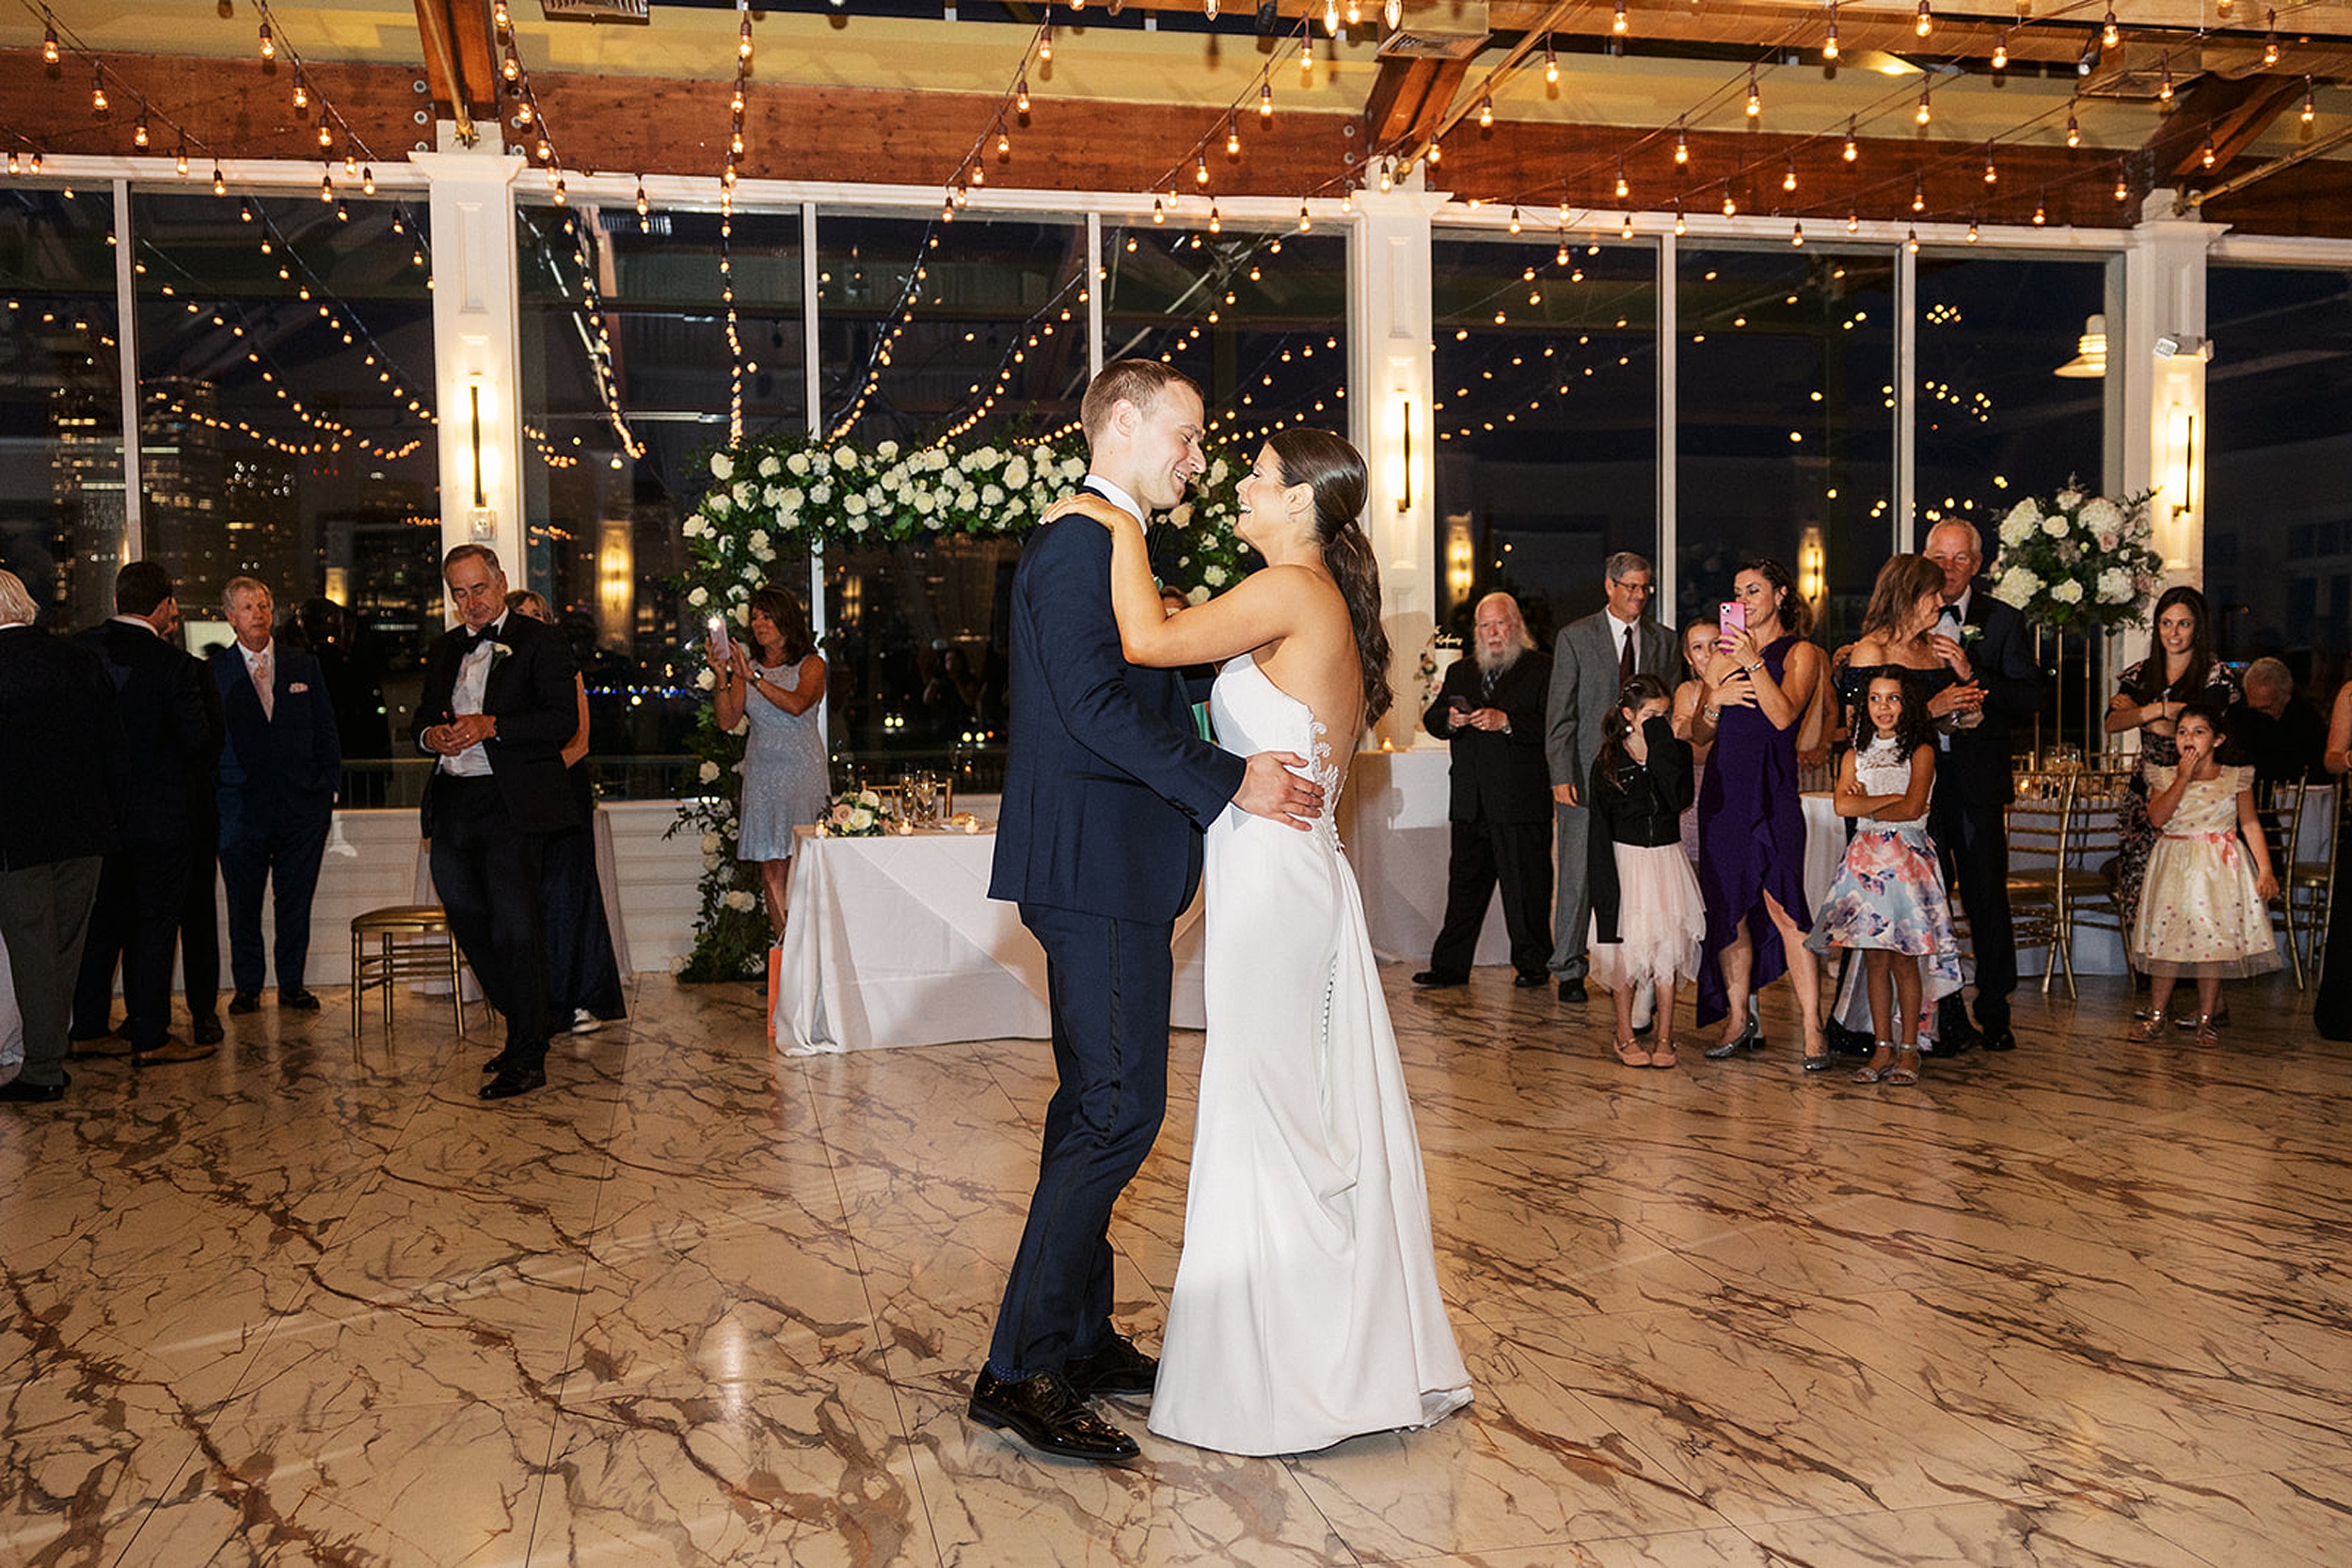 Newlyweds dance and laugh together on marble floor of the Liberty House Wedding venue